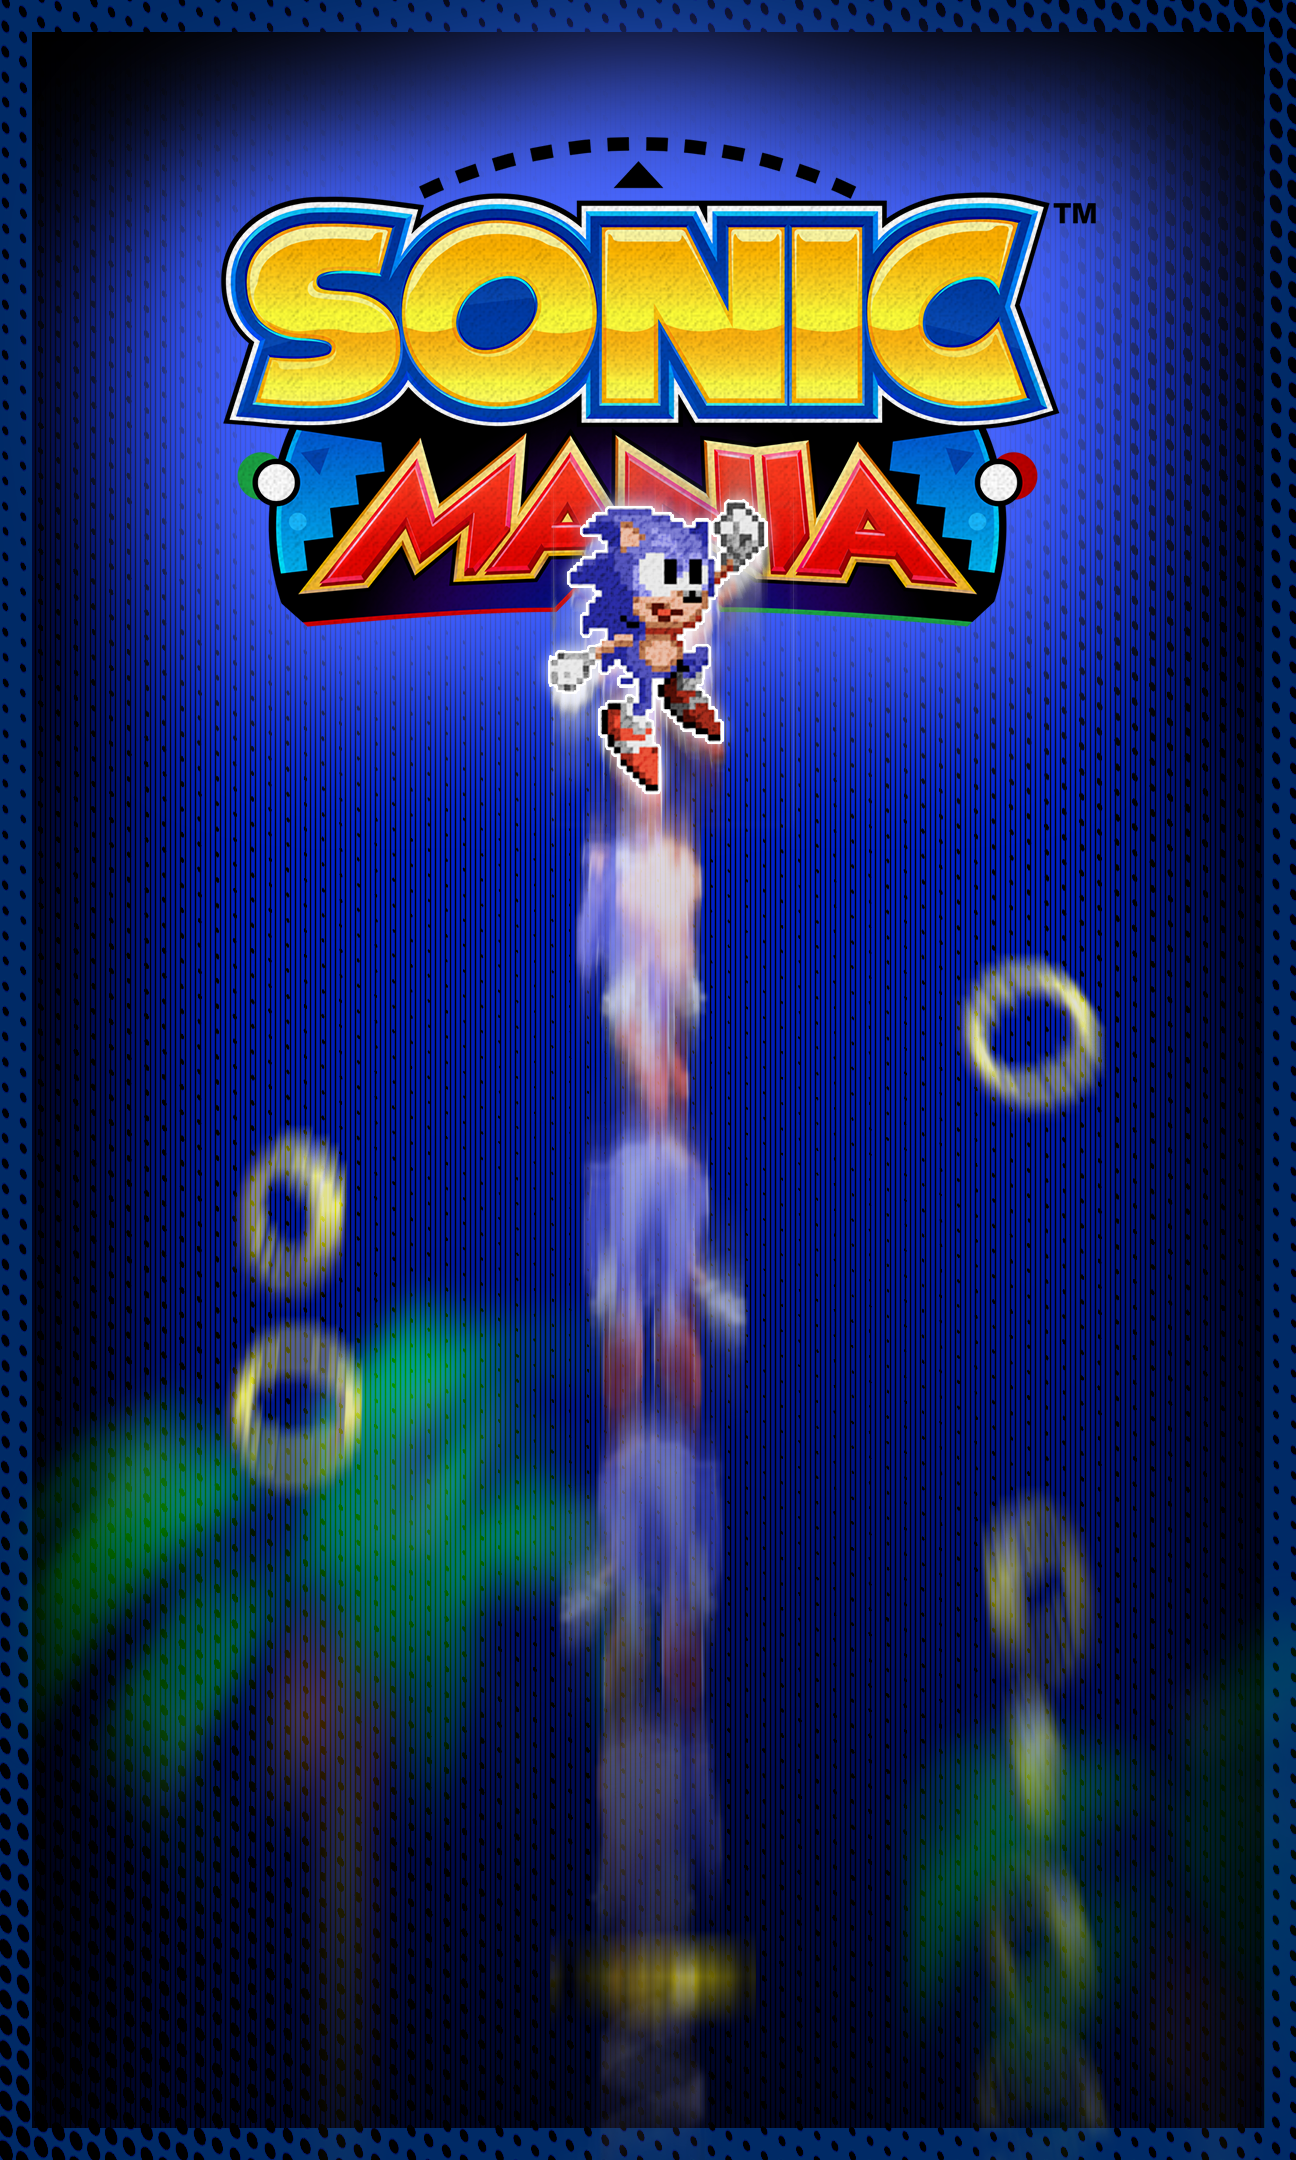 I made a neat phone wallpapers based on Sonic Mania